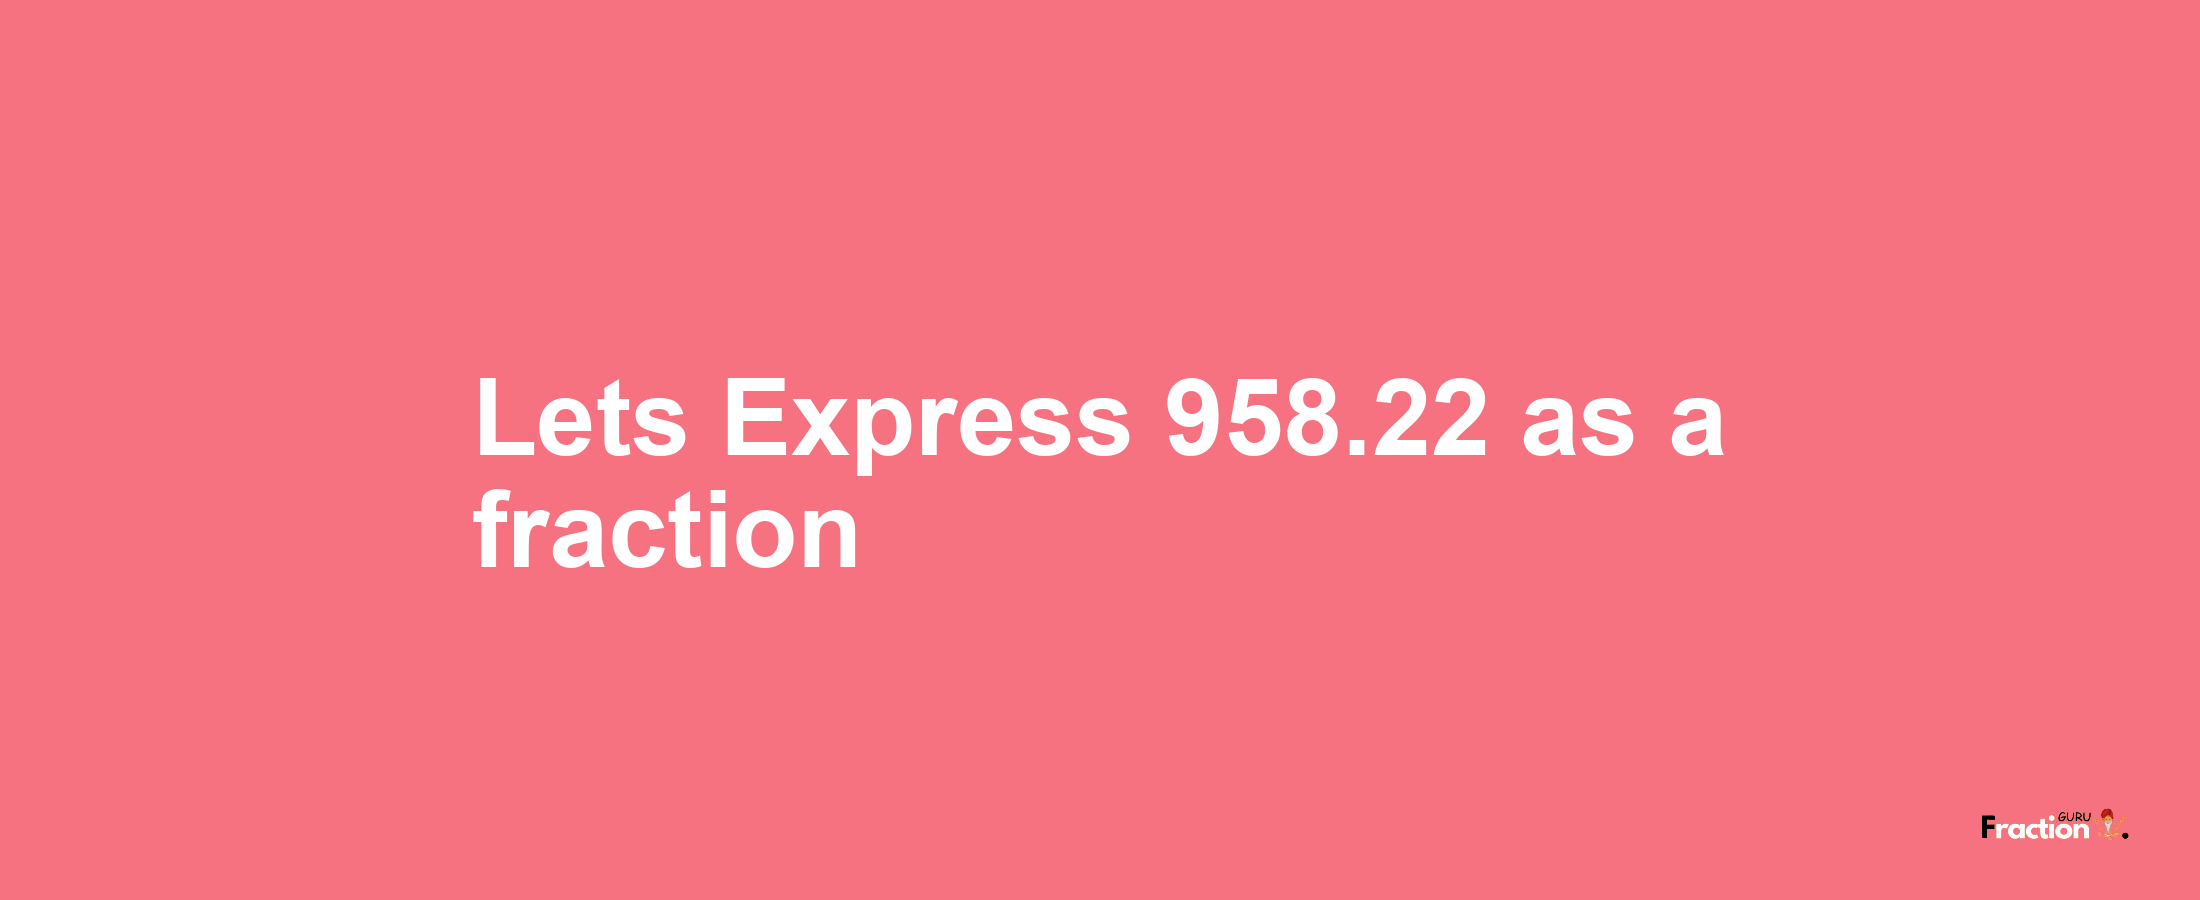 Lets Express 958.22 as afraction